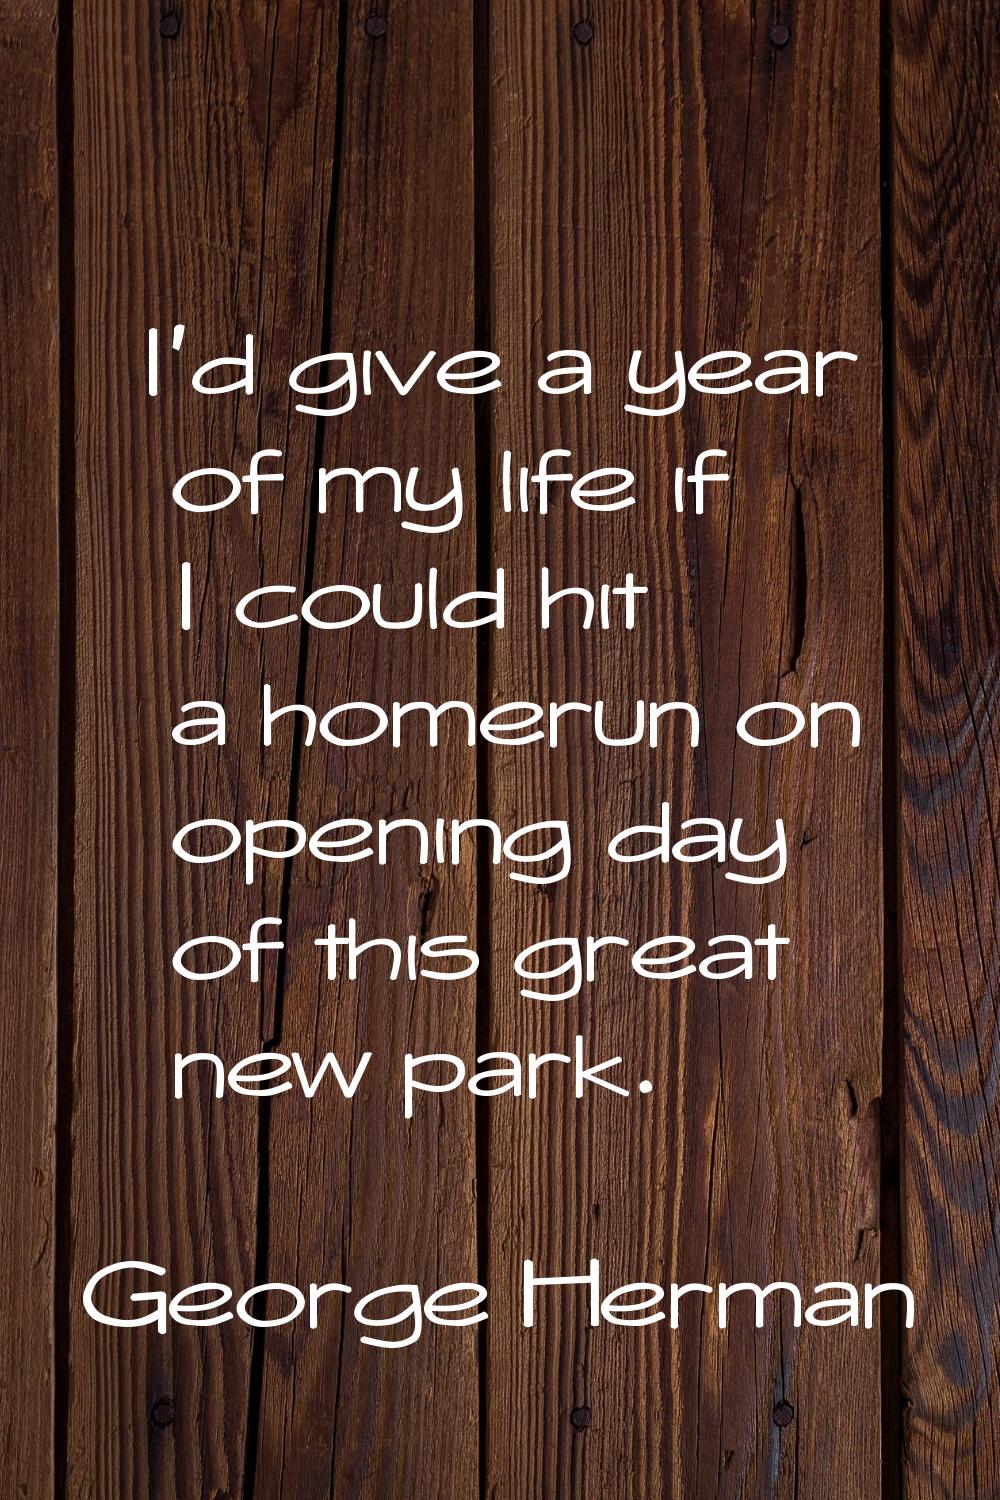 I'd give a year of my life if I could hit a homerun on opening day of this great new park.